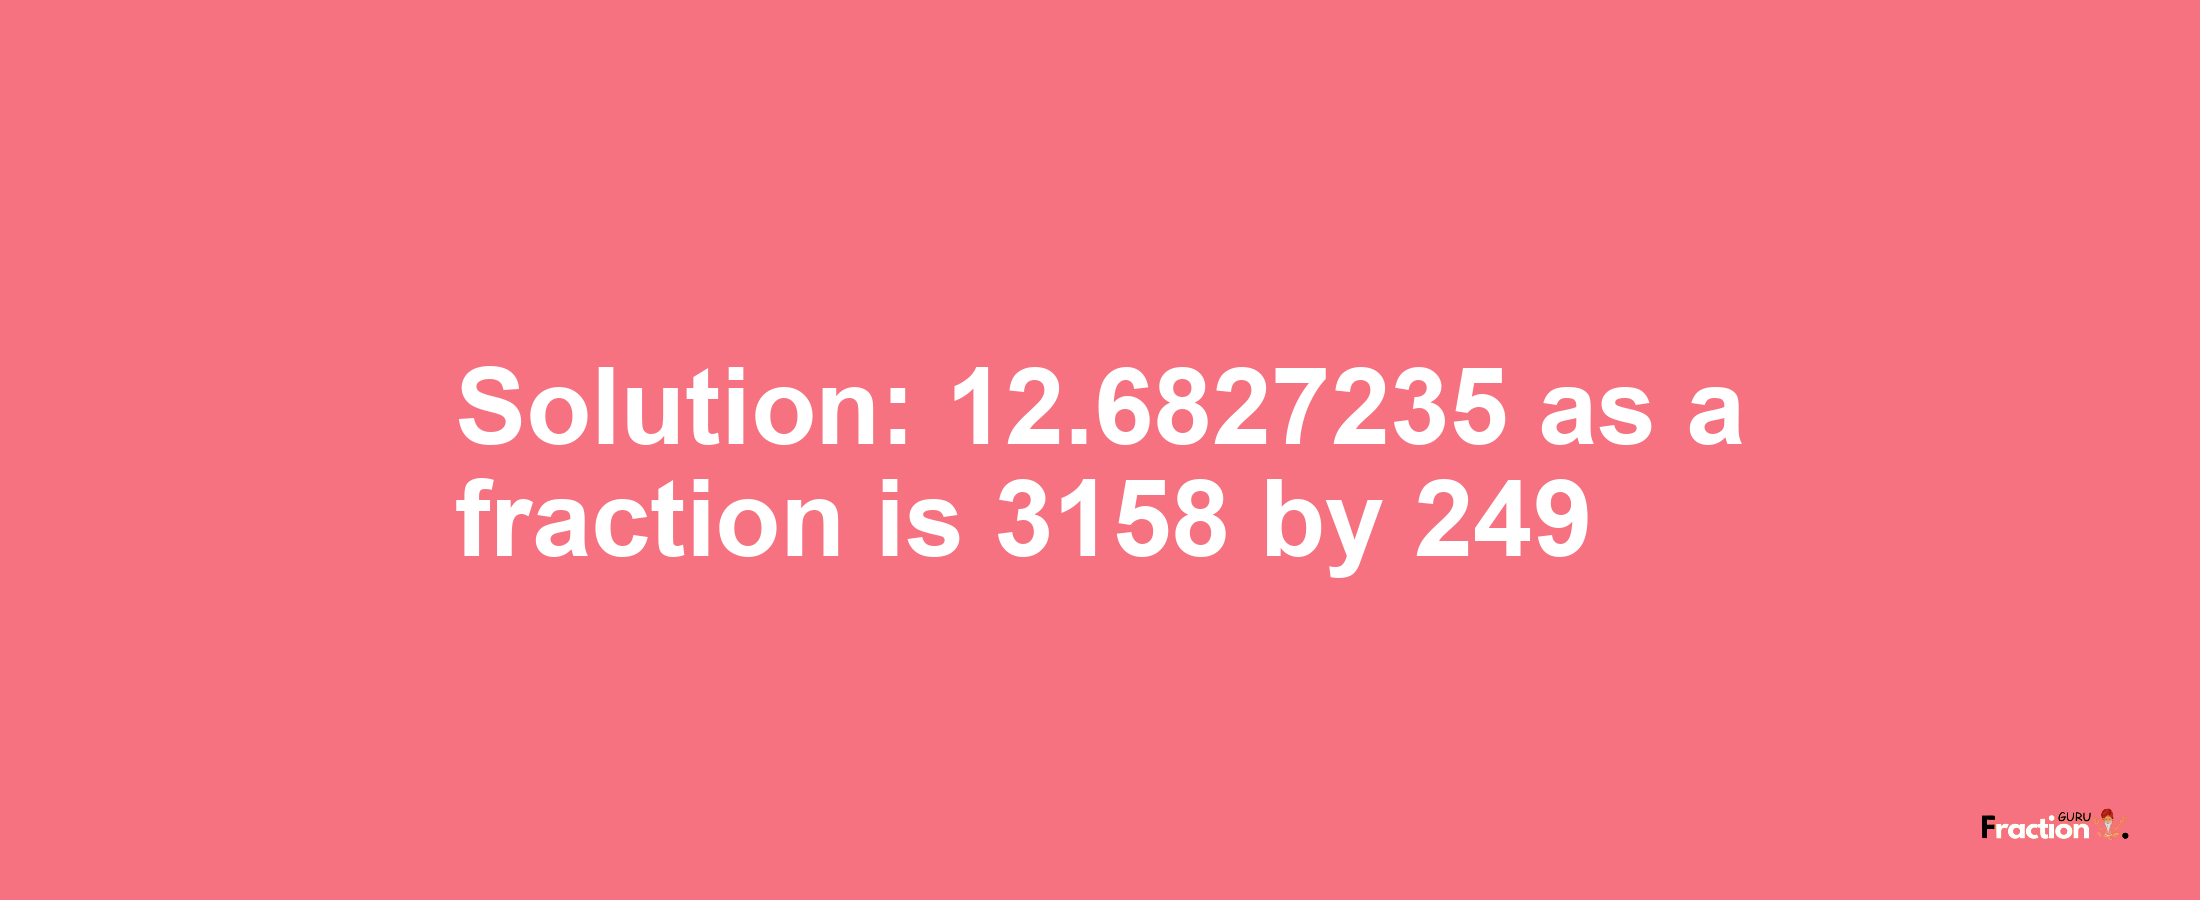 Solution:12.6827235 as a fraction is 3158/249